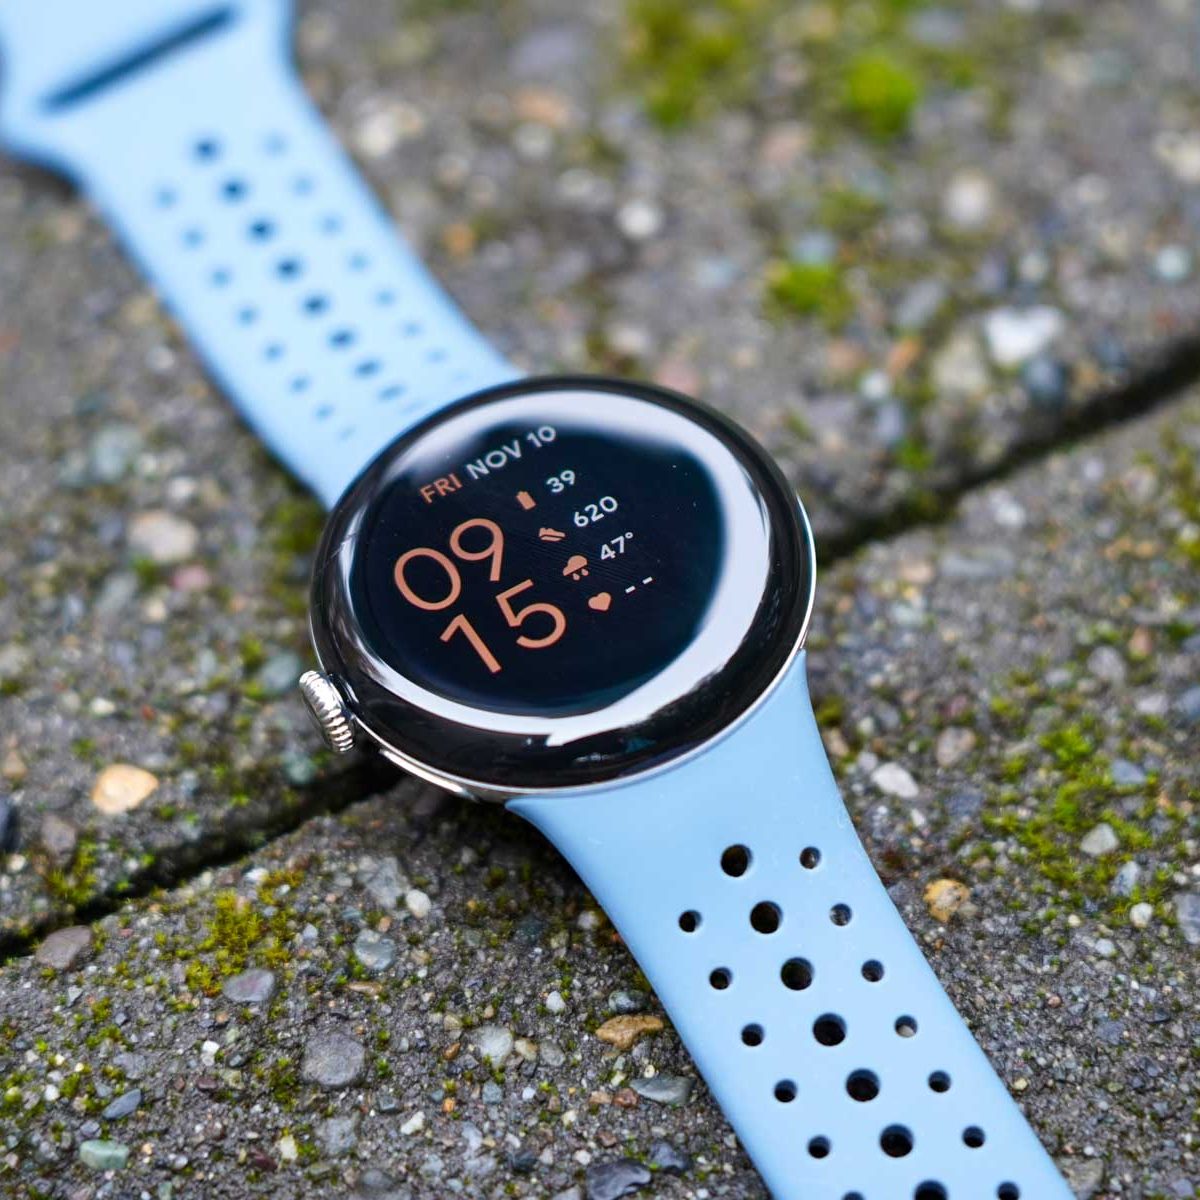 All the Pixel Watch 2 really needs is good battery life - The Verge